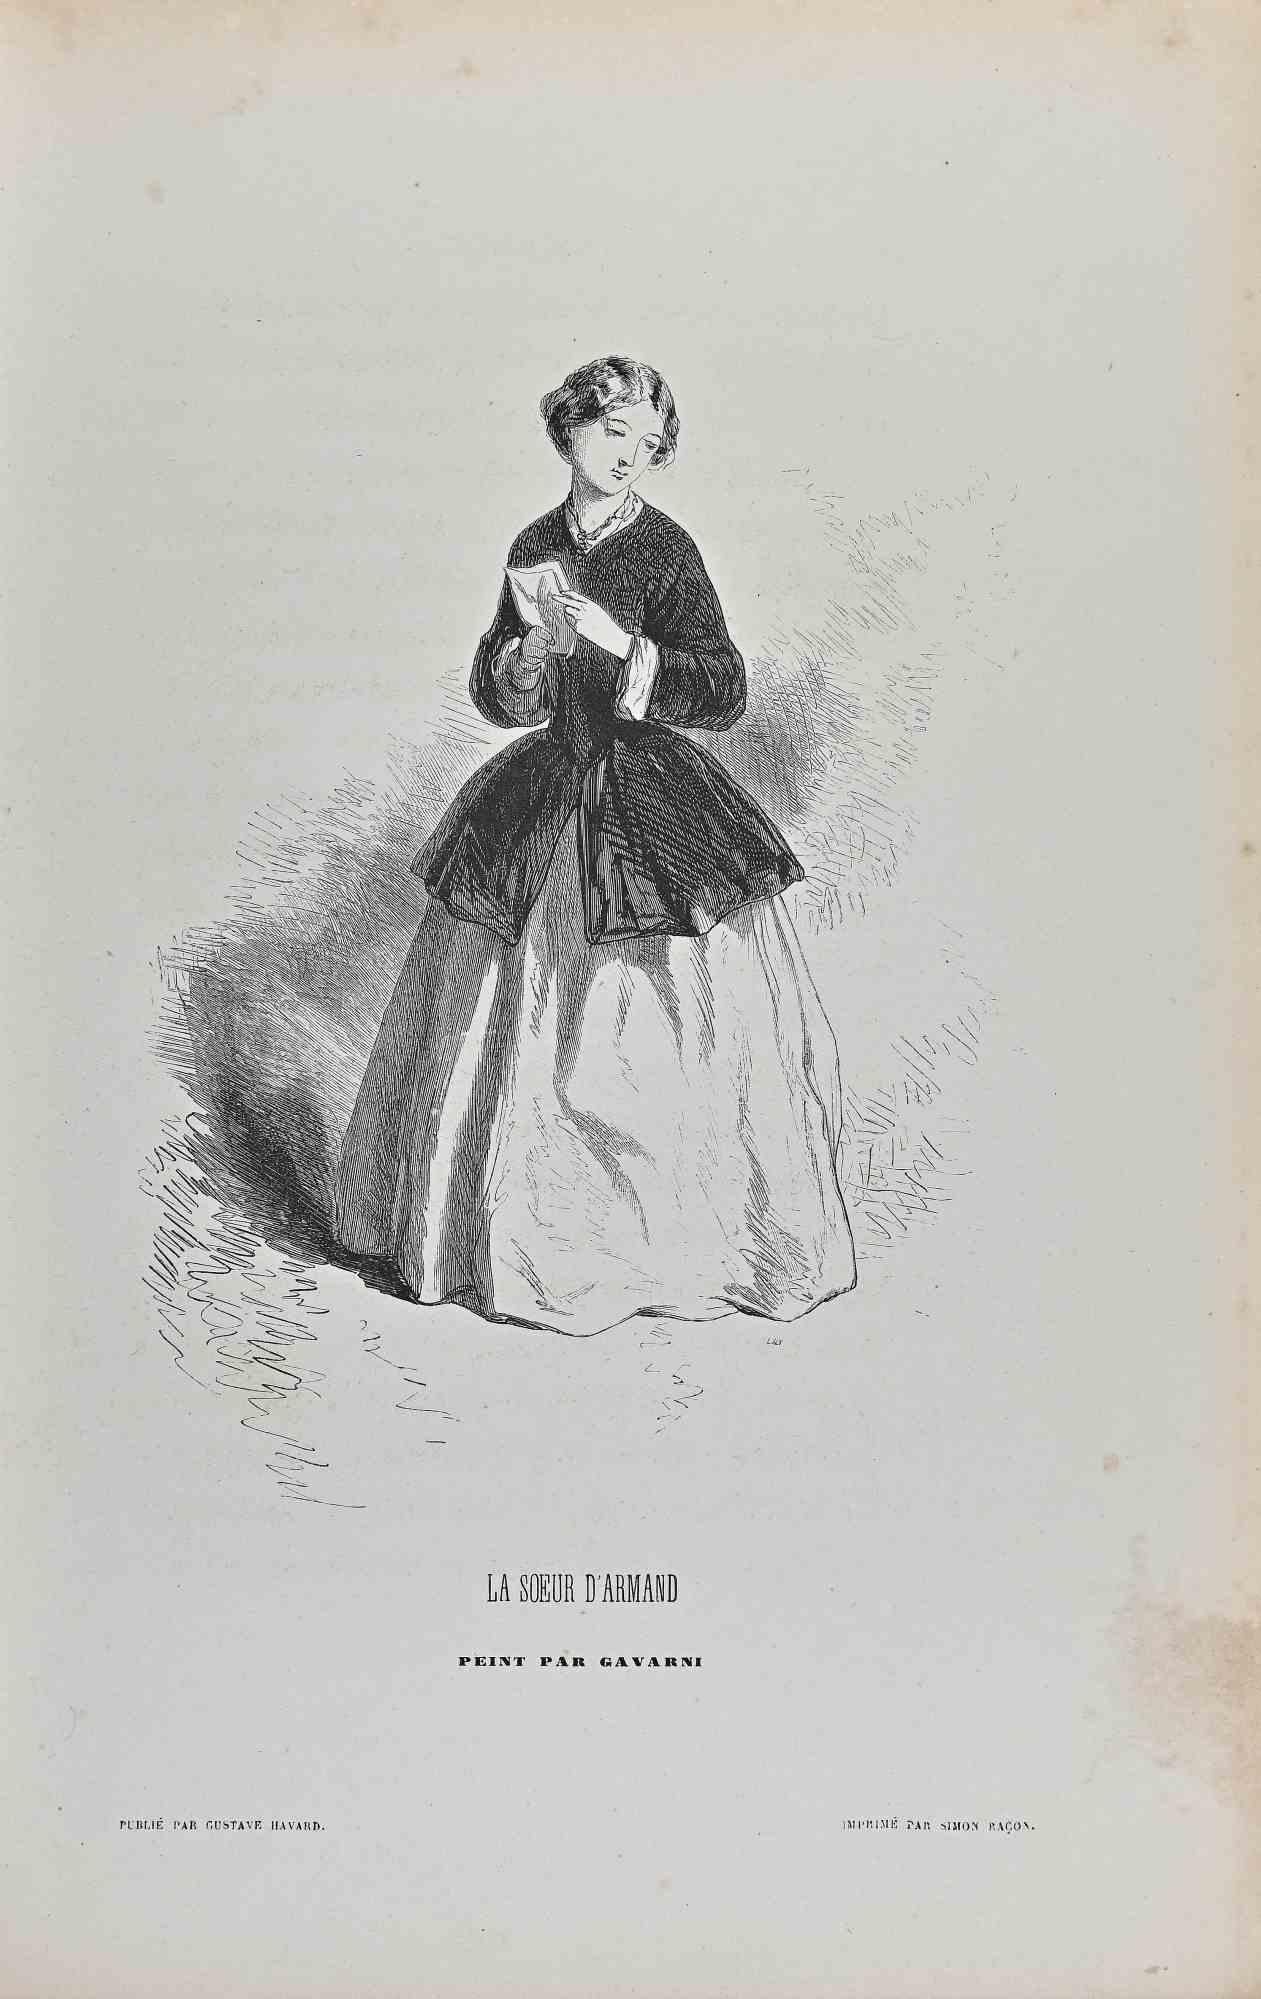 La Soeur D'Armand is a lithograph on ivory-colored paper, realized by the French draftsman Paul Gavarni (alias Guillaume Sulpice Chevalier Gavarni, 1804-1866) in the mid-19th Century.

Signed on the plate" Par Gavarni".

From series of "Masques et